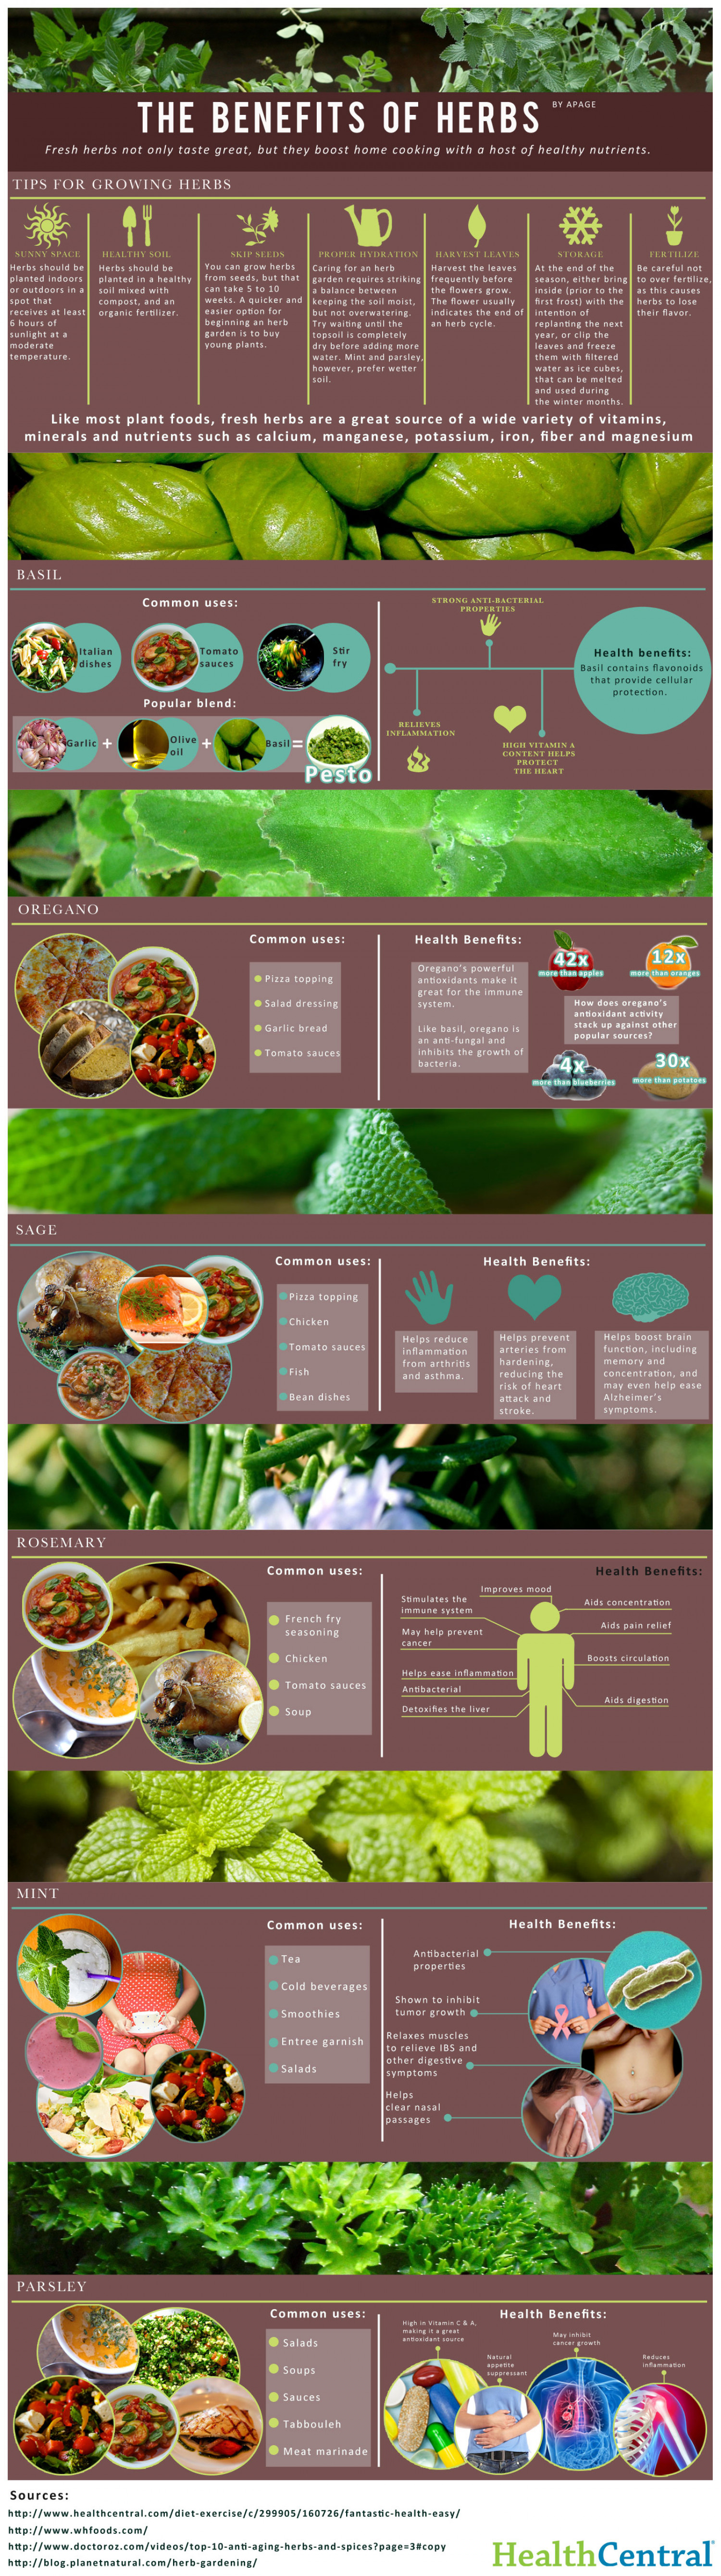 The Benefits of Herbs